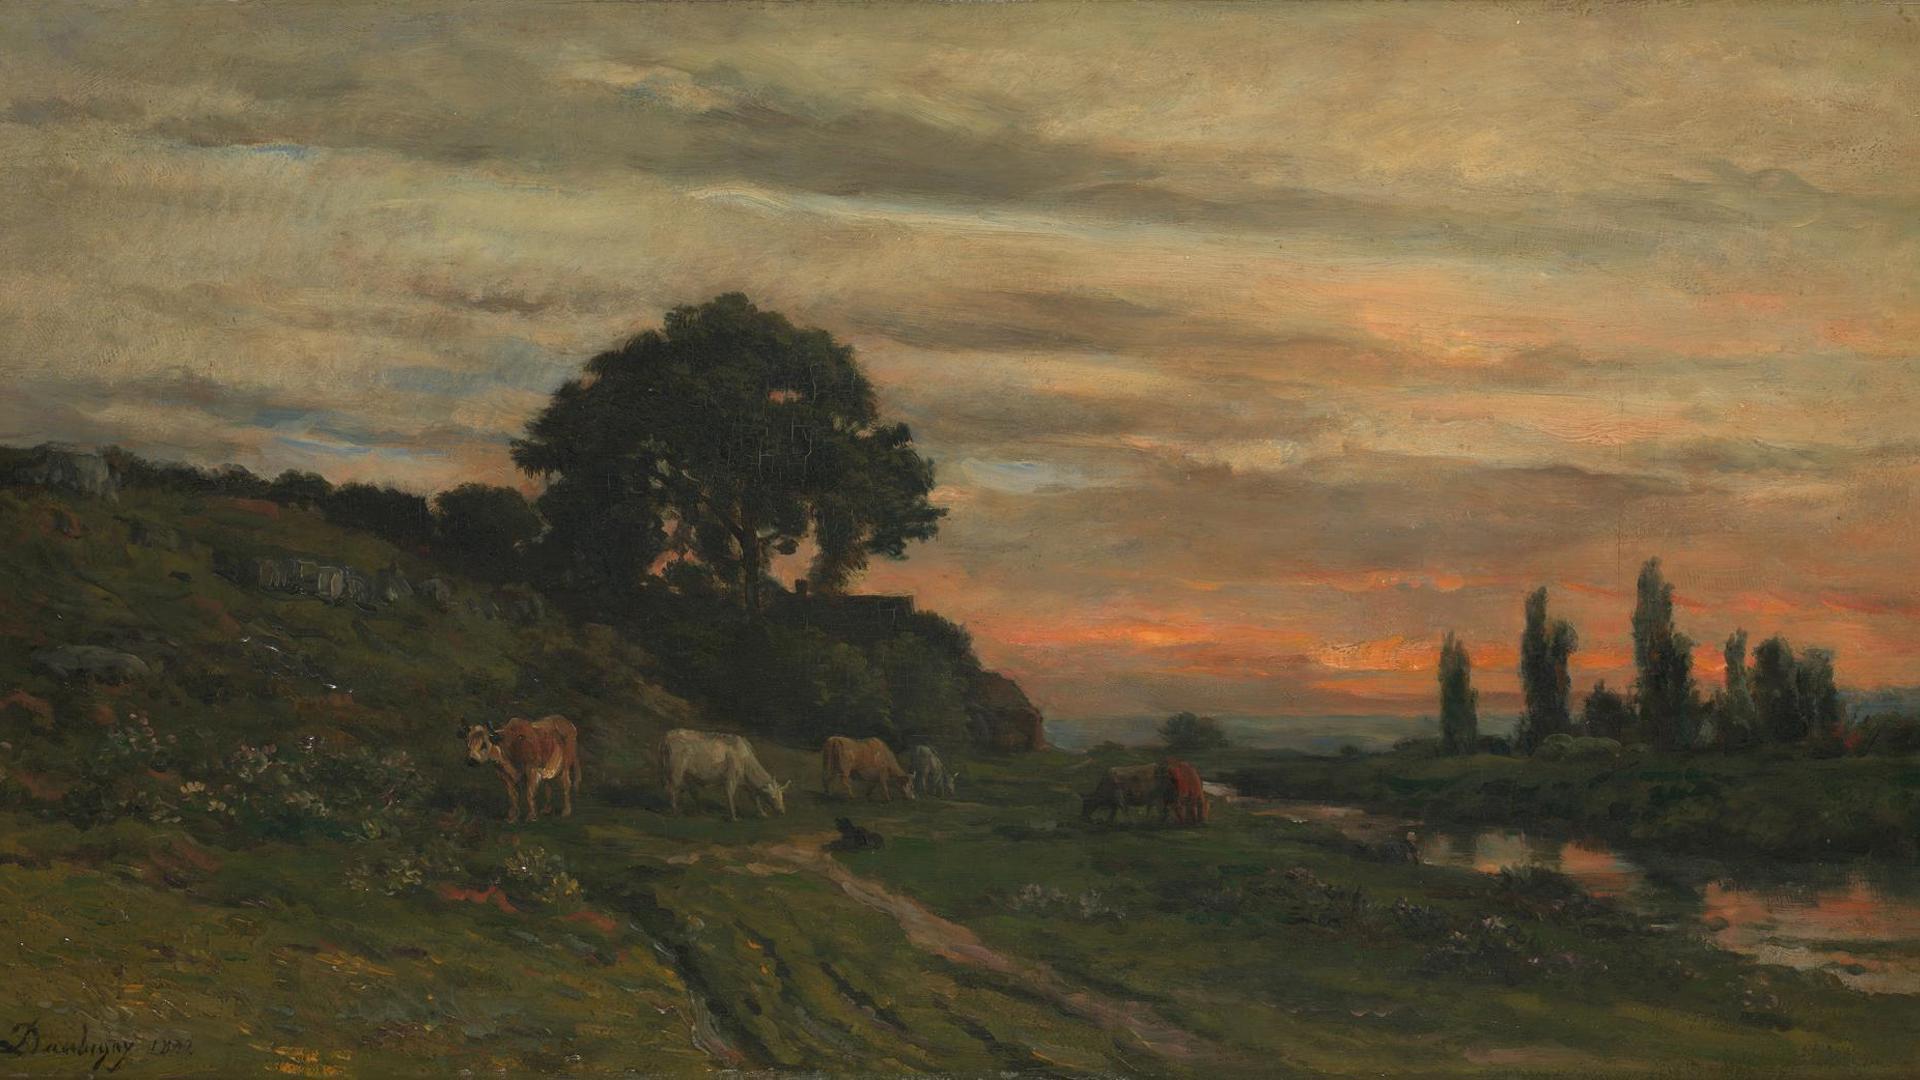 Landscape with Cattle by a Stream by Charles-François Daubigny